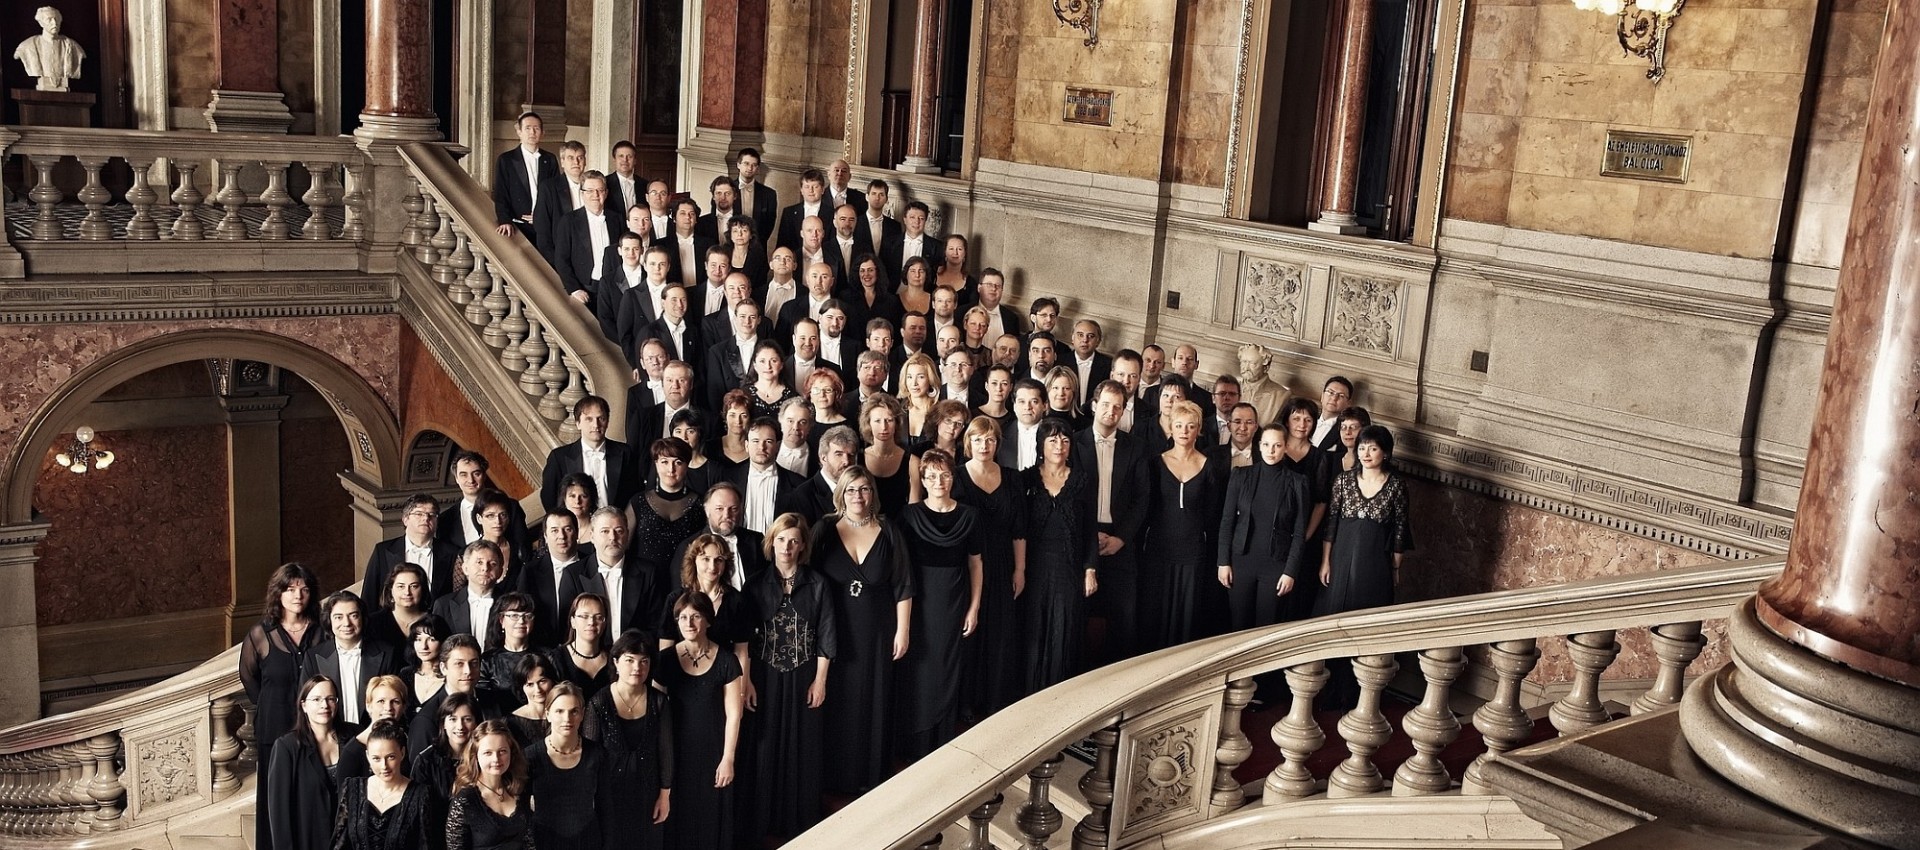 Ludovic Tézier & Guests Sing Arias @ Palace Of Arts, 13 March